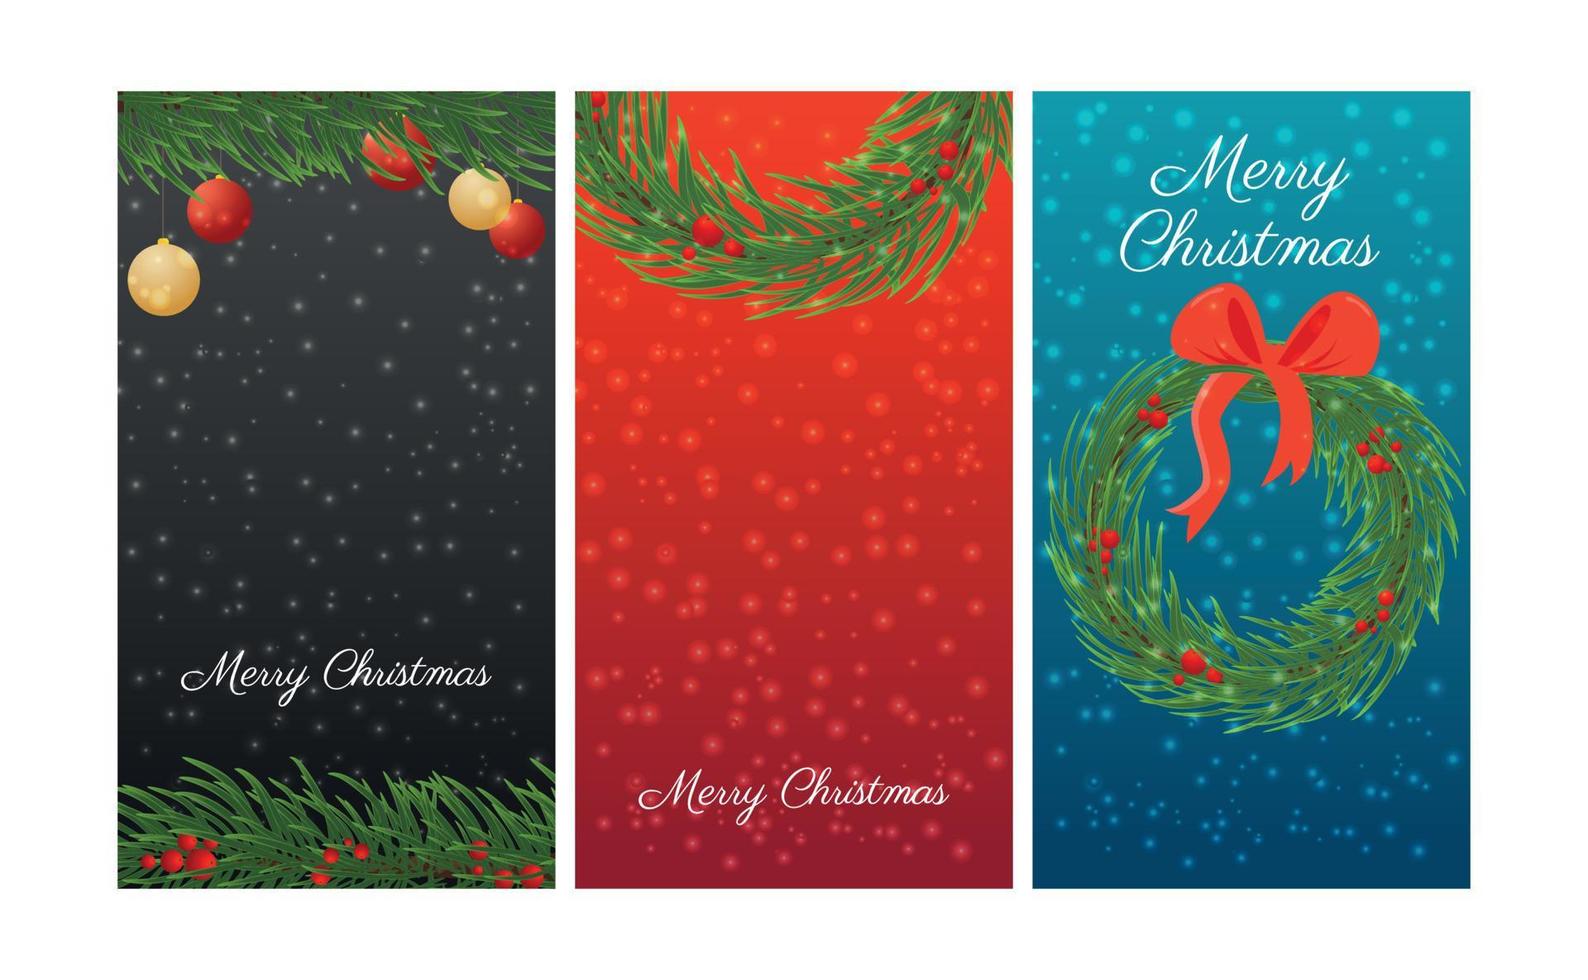 A set of Christmas vertical banners with a festive wreath and decorations. Vector illustration.